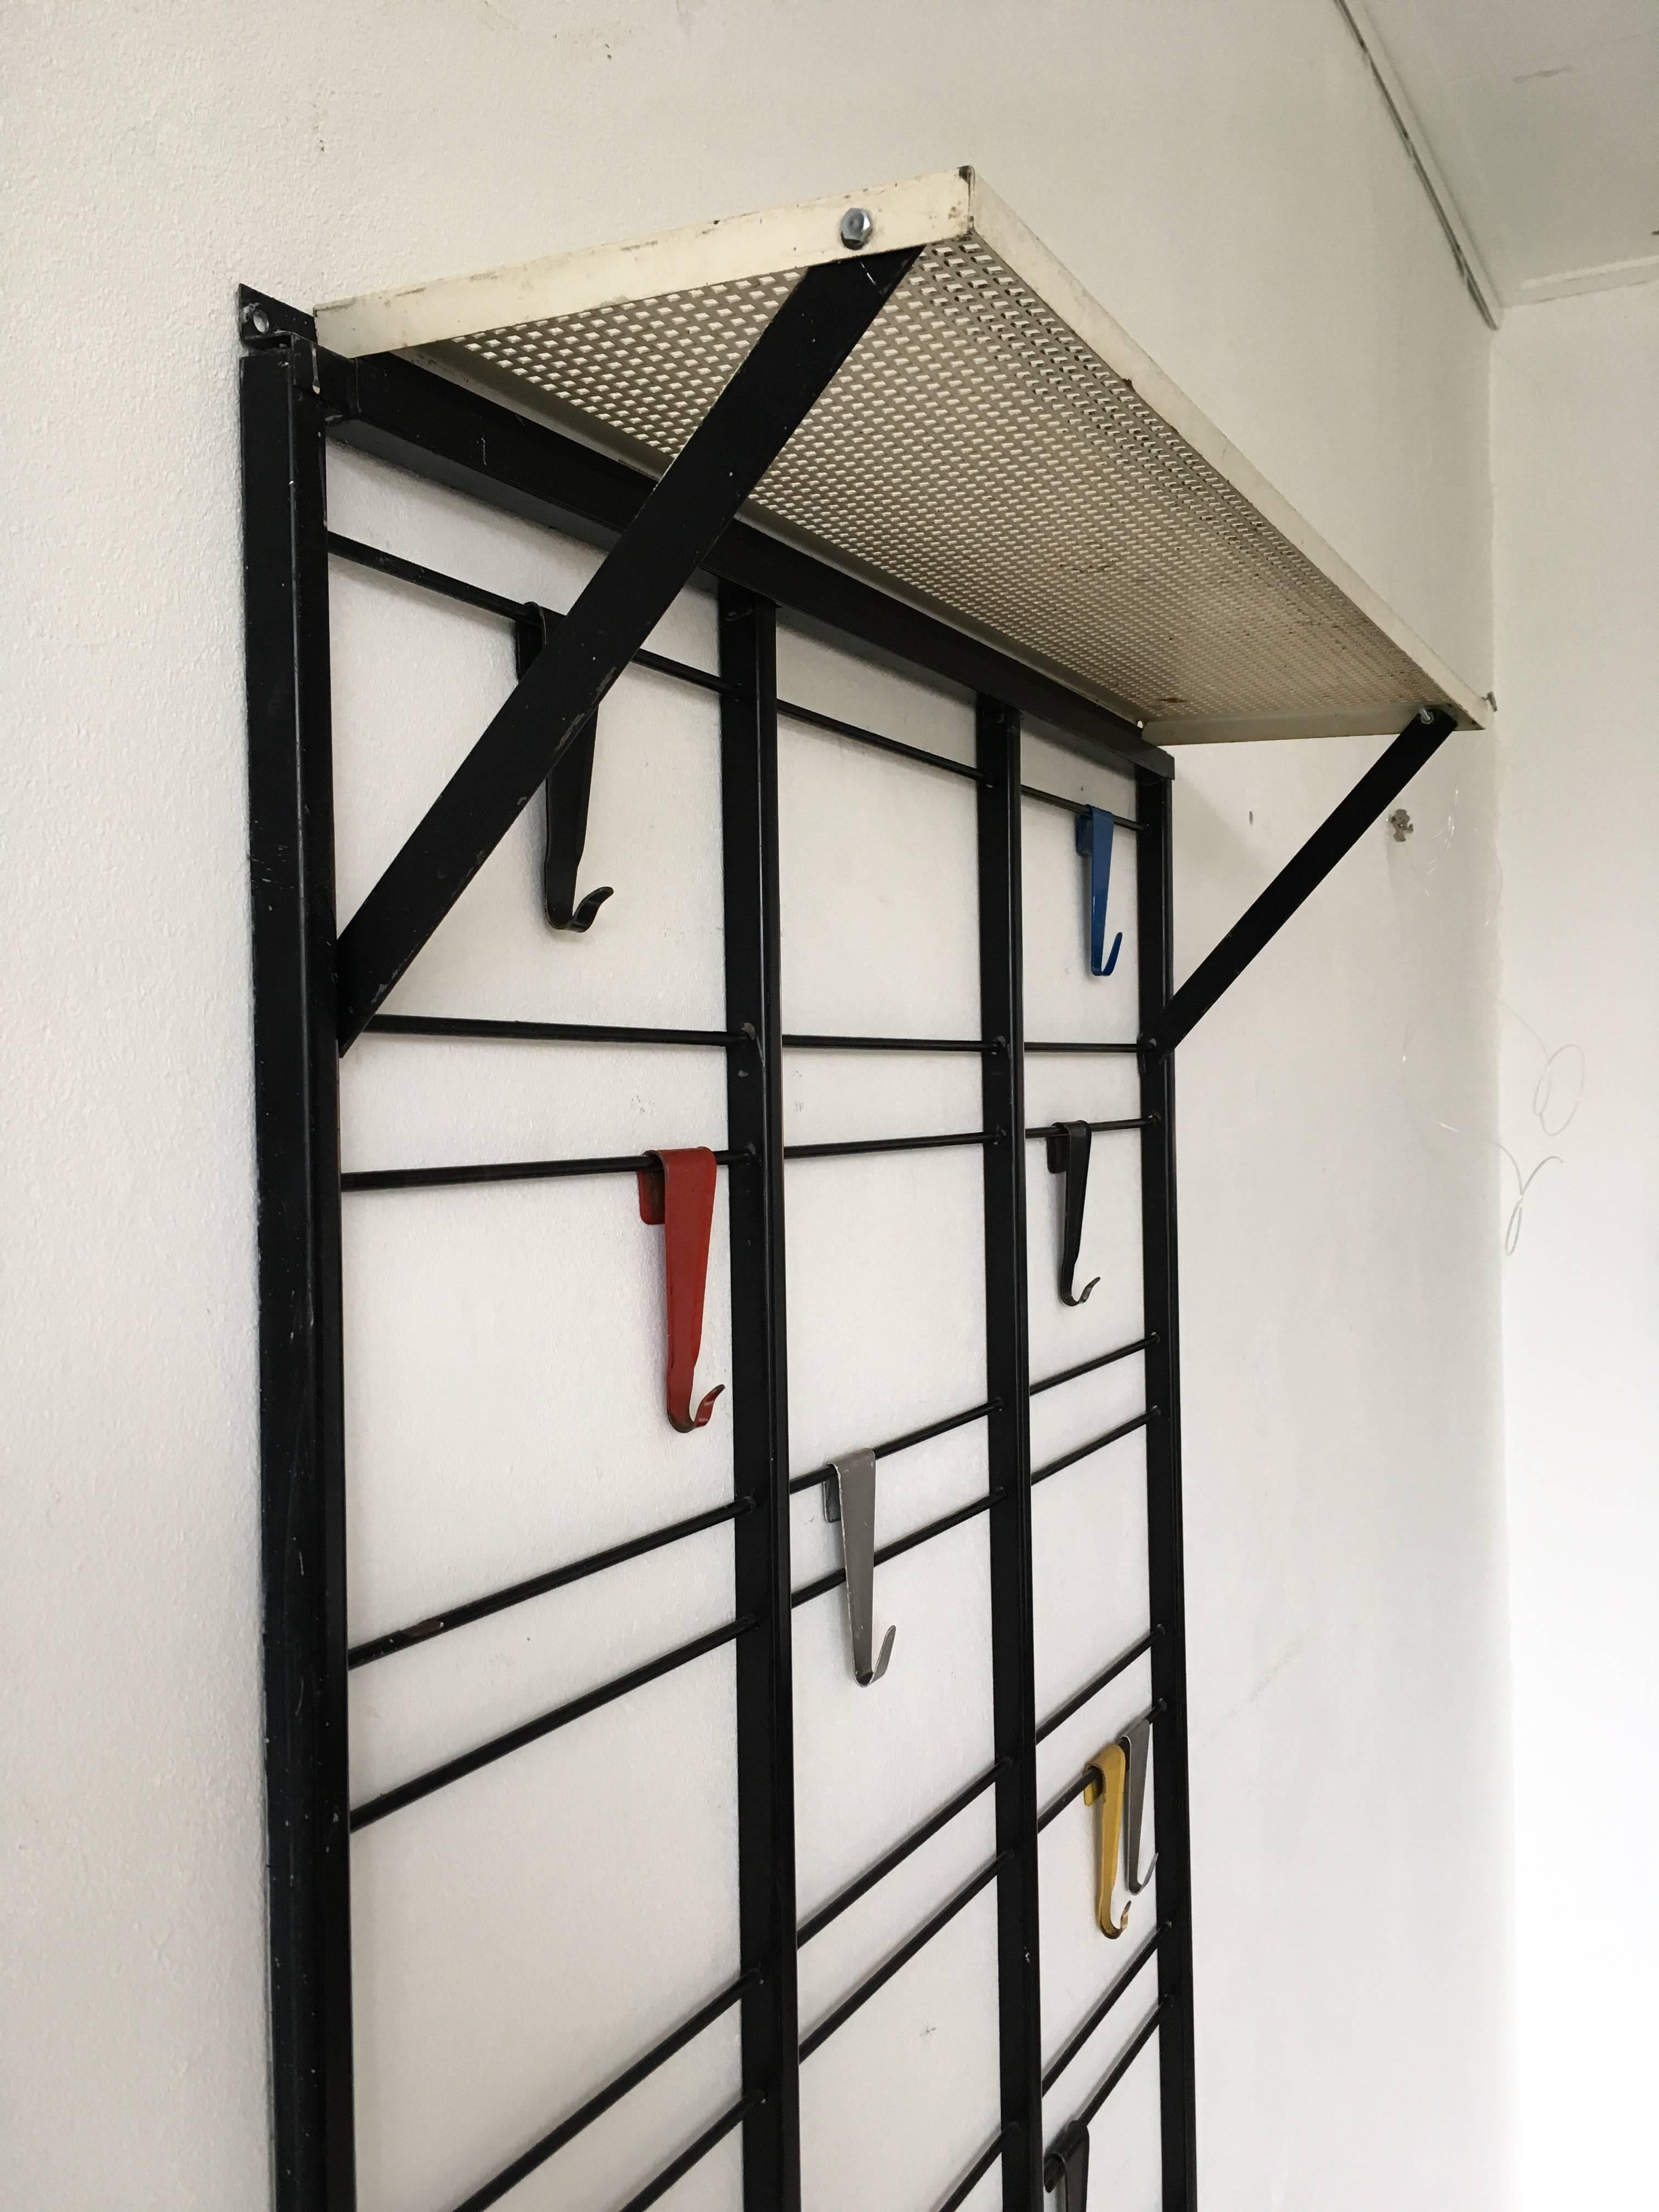 Gorgeous Industrial piece from The Netherlands called 'Toonladder'. Designed by Coen de Vries for Pilastro circa 1950s in The Netherlands. This rack comes with a hat rack on top and 18 hooks. This Dutch design item remains in good condition with